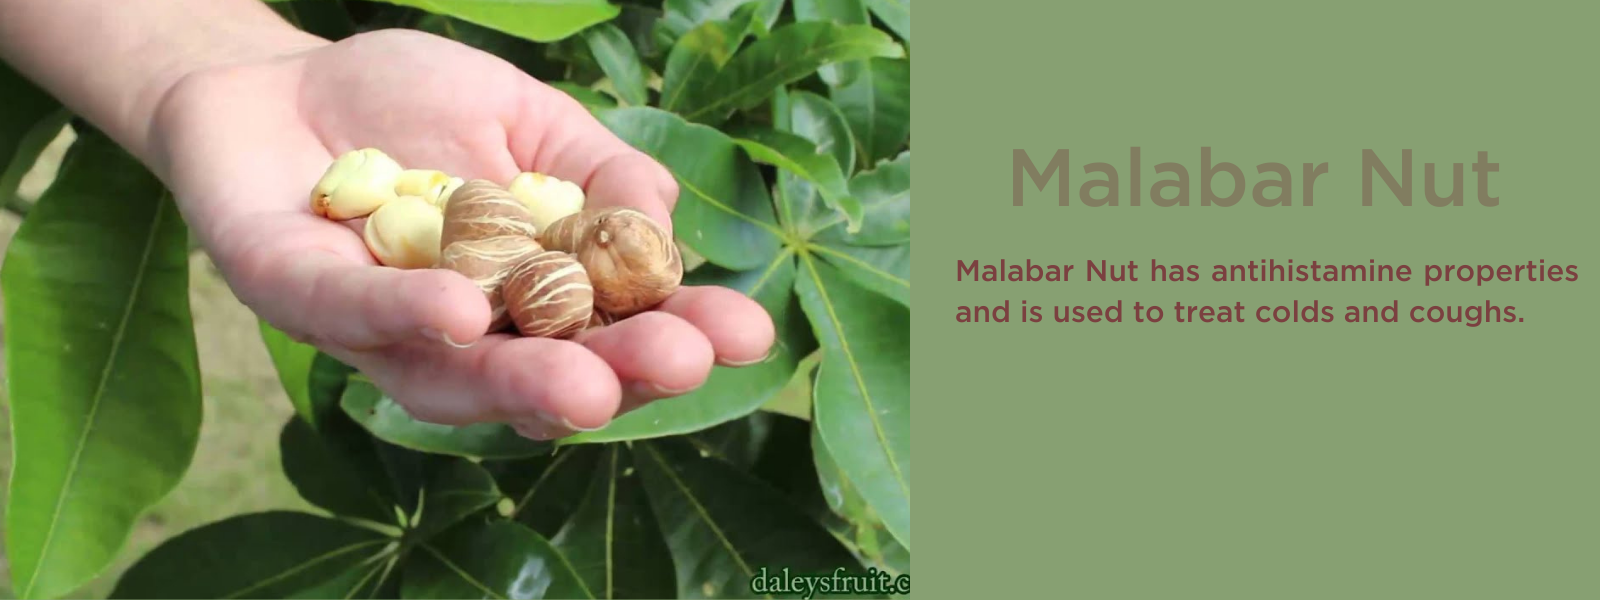 Malabar Nut - Health Benefits, Uses and Important Facts